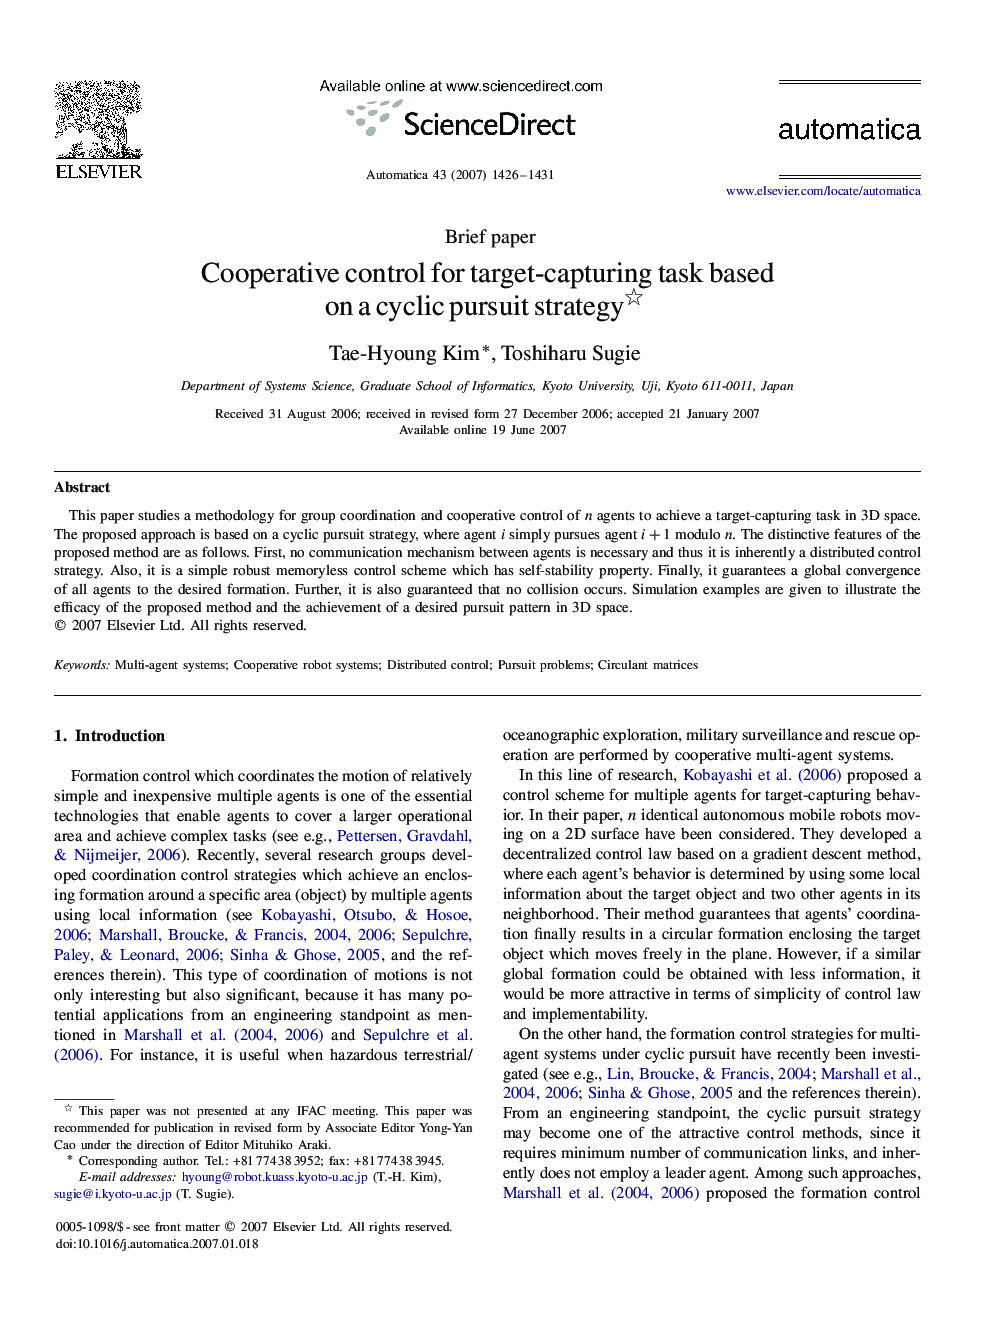 Cooperative control for target-capturing task based on a cyclic pursuit strategy 